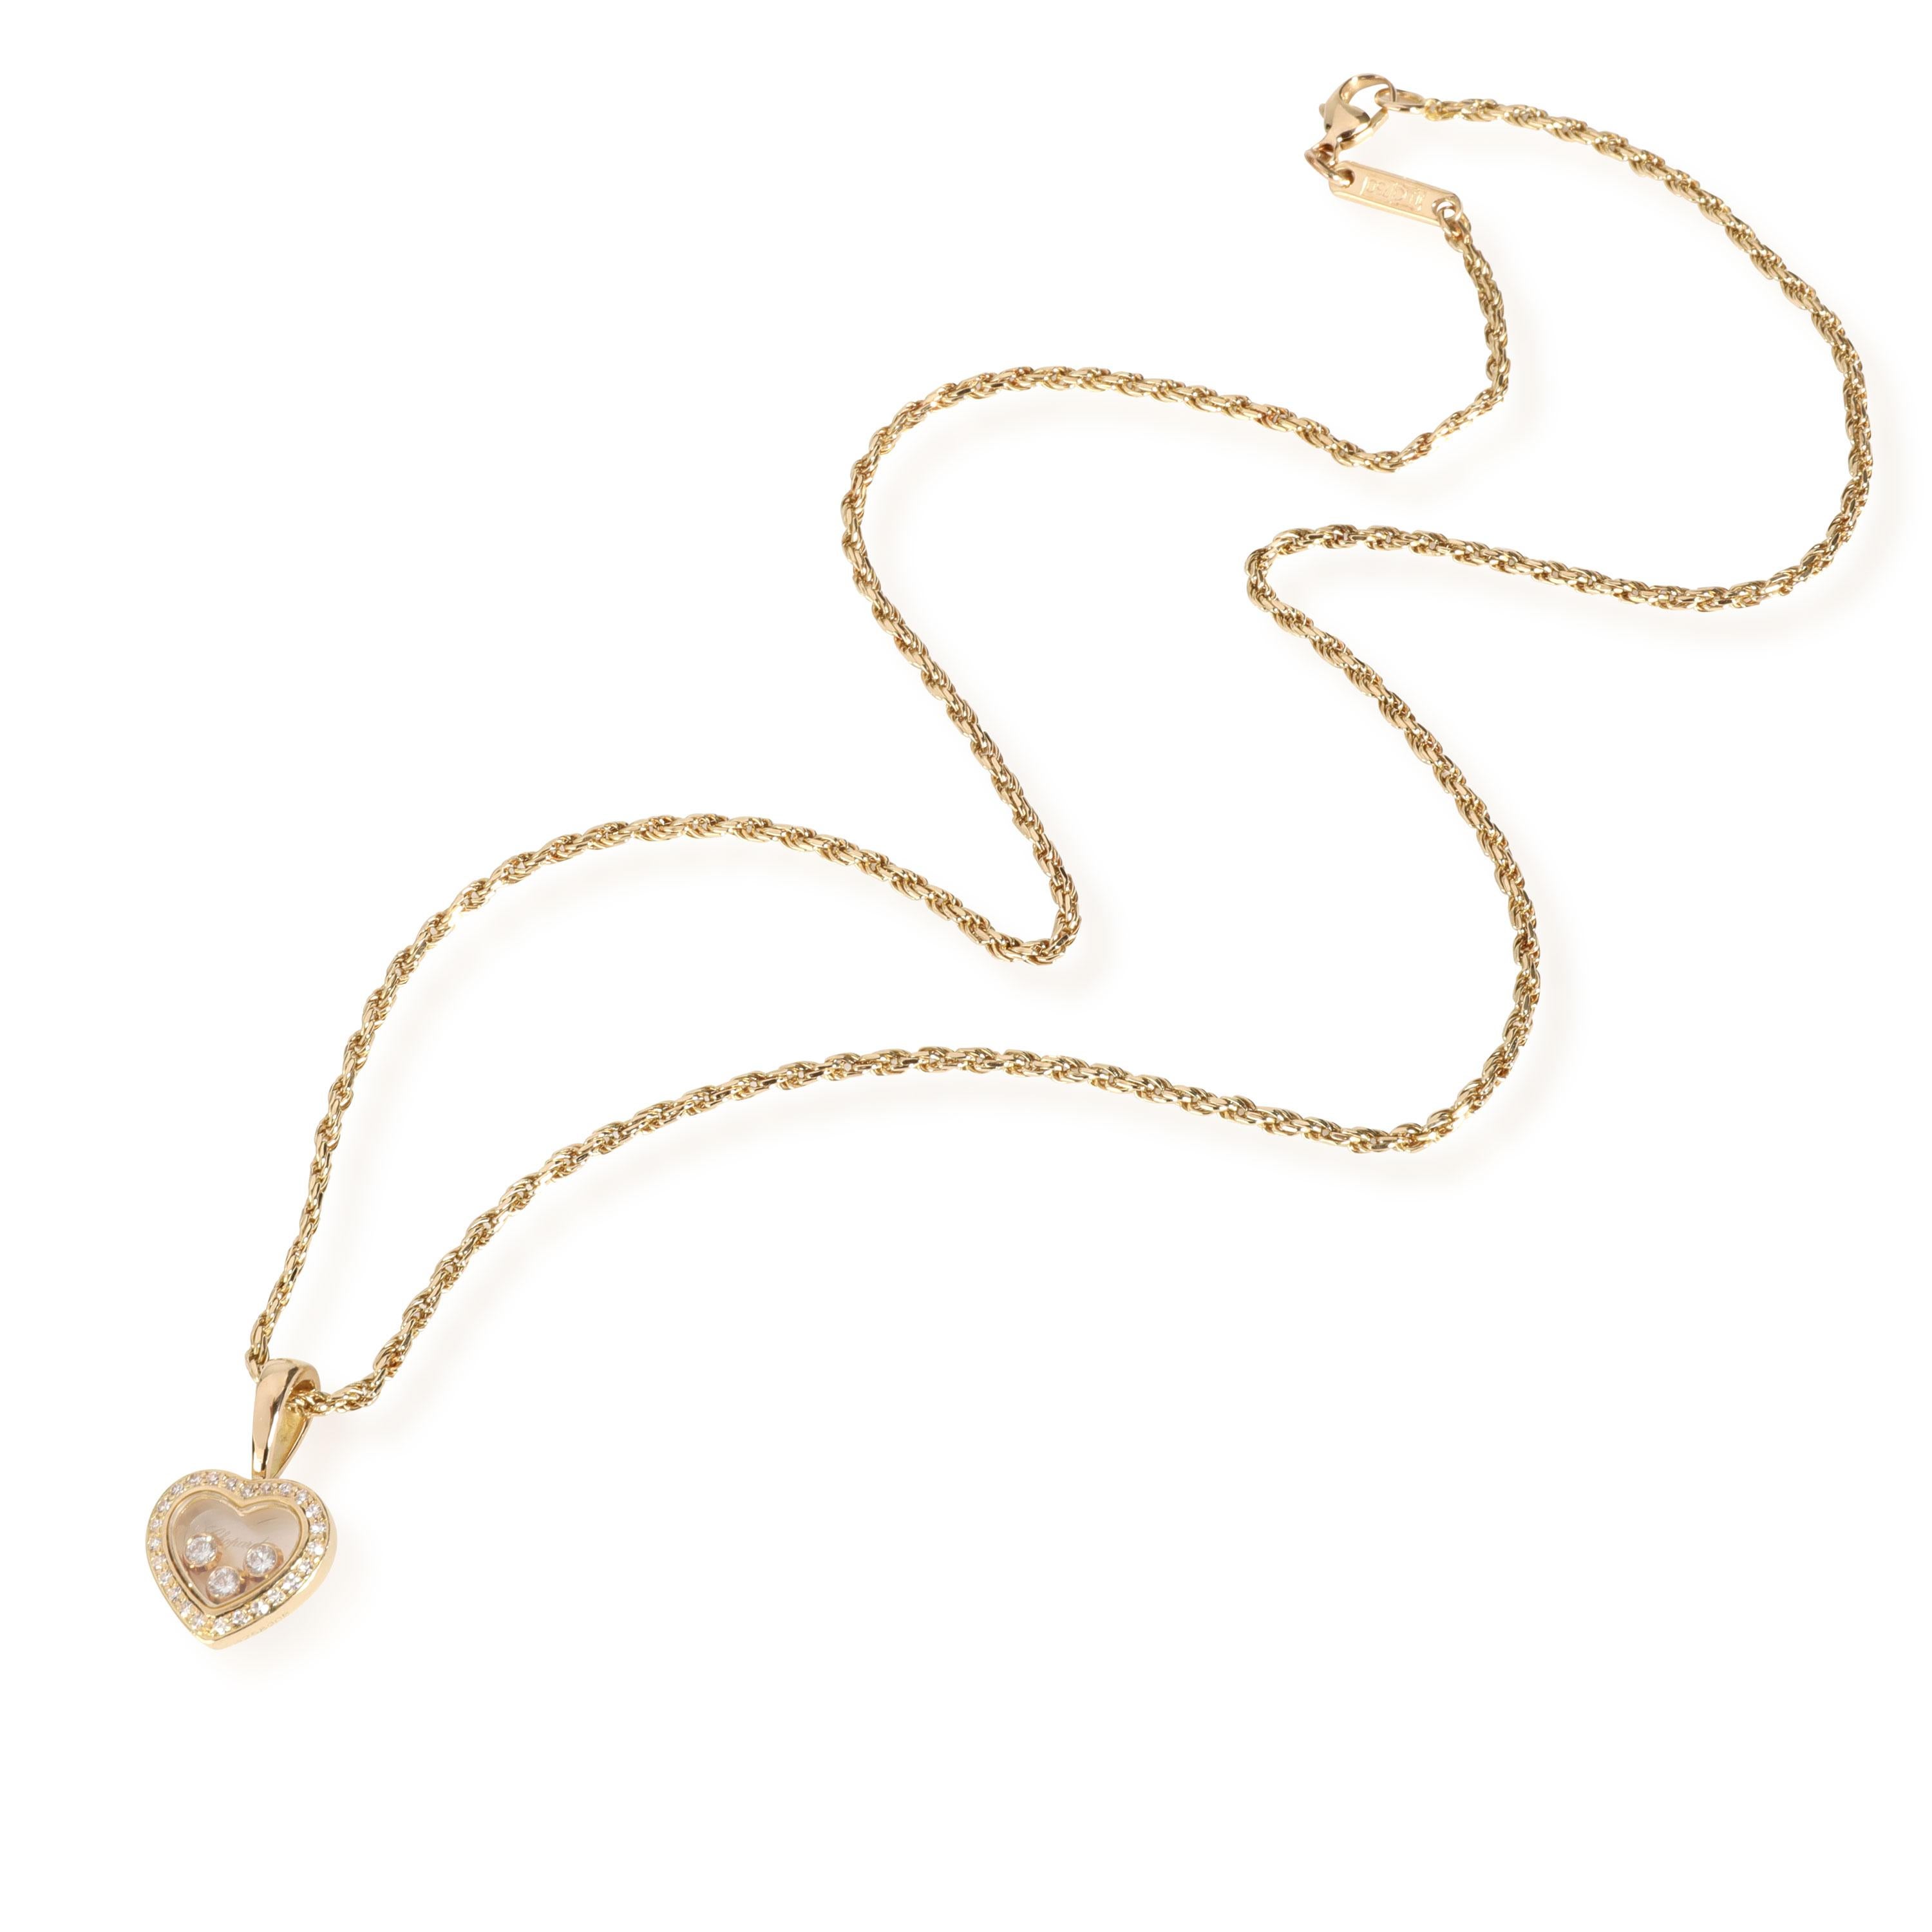 
Chopard Happy Diamonds Heart Pendant in 18K Yellow Gold 0.23 CTW

PRIMARY DETAILS
SKU: 113197
Listing Title: Chopard Happy Diamonds Heart Pendant in 18K Yellow Gold 0.23 CTW
Condition Description: Retails for 4,740 USD. In excellent condition and